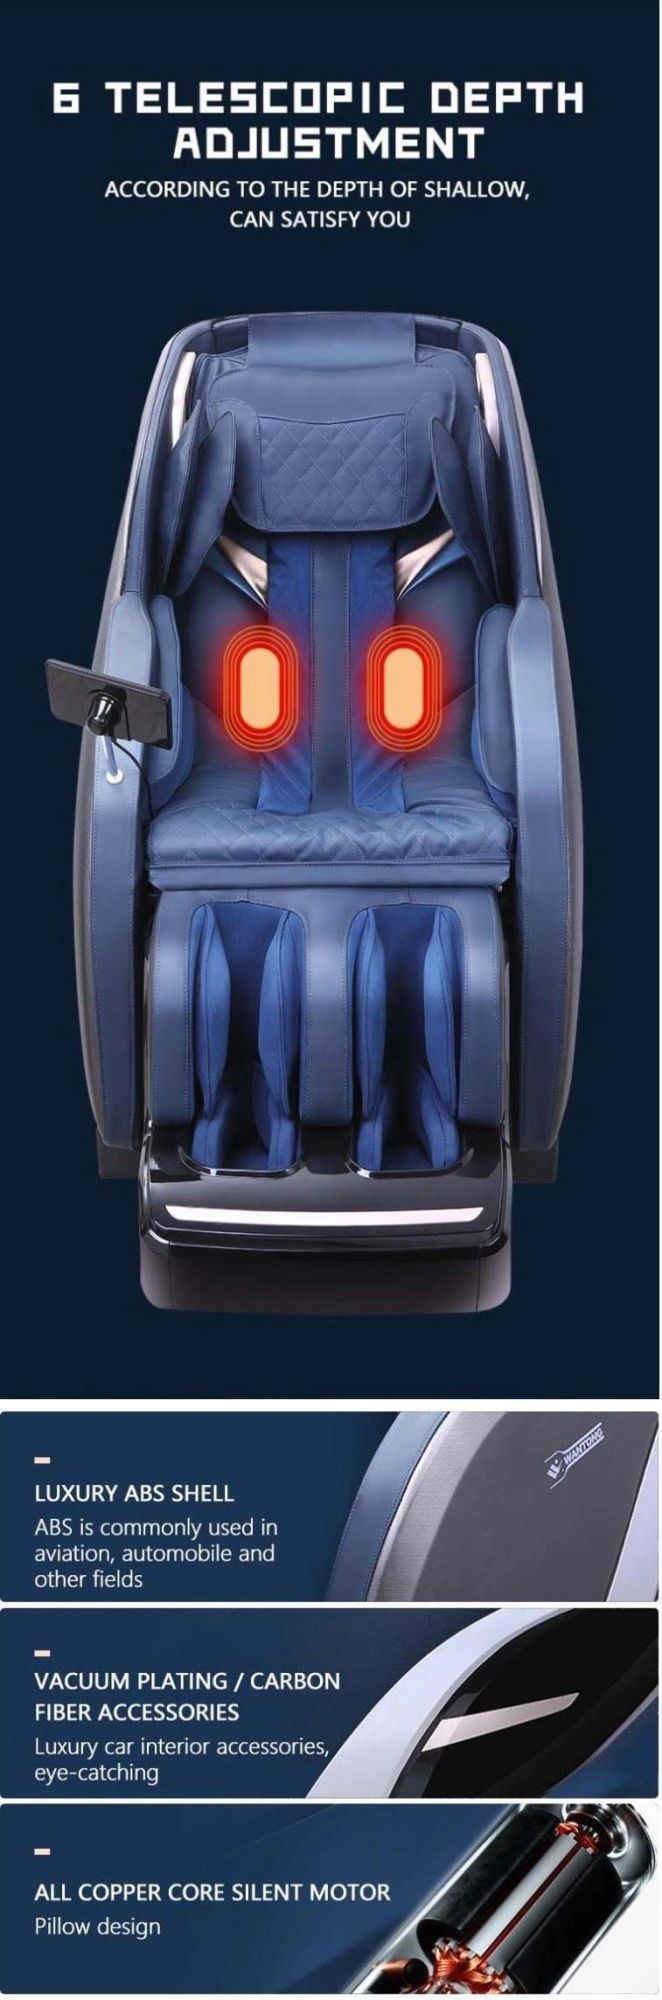 Pressure Comfortable 4D Full Body Massage Chair with Foot Roller Massage Chair